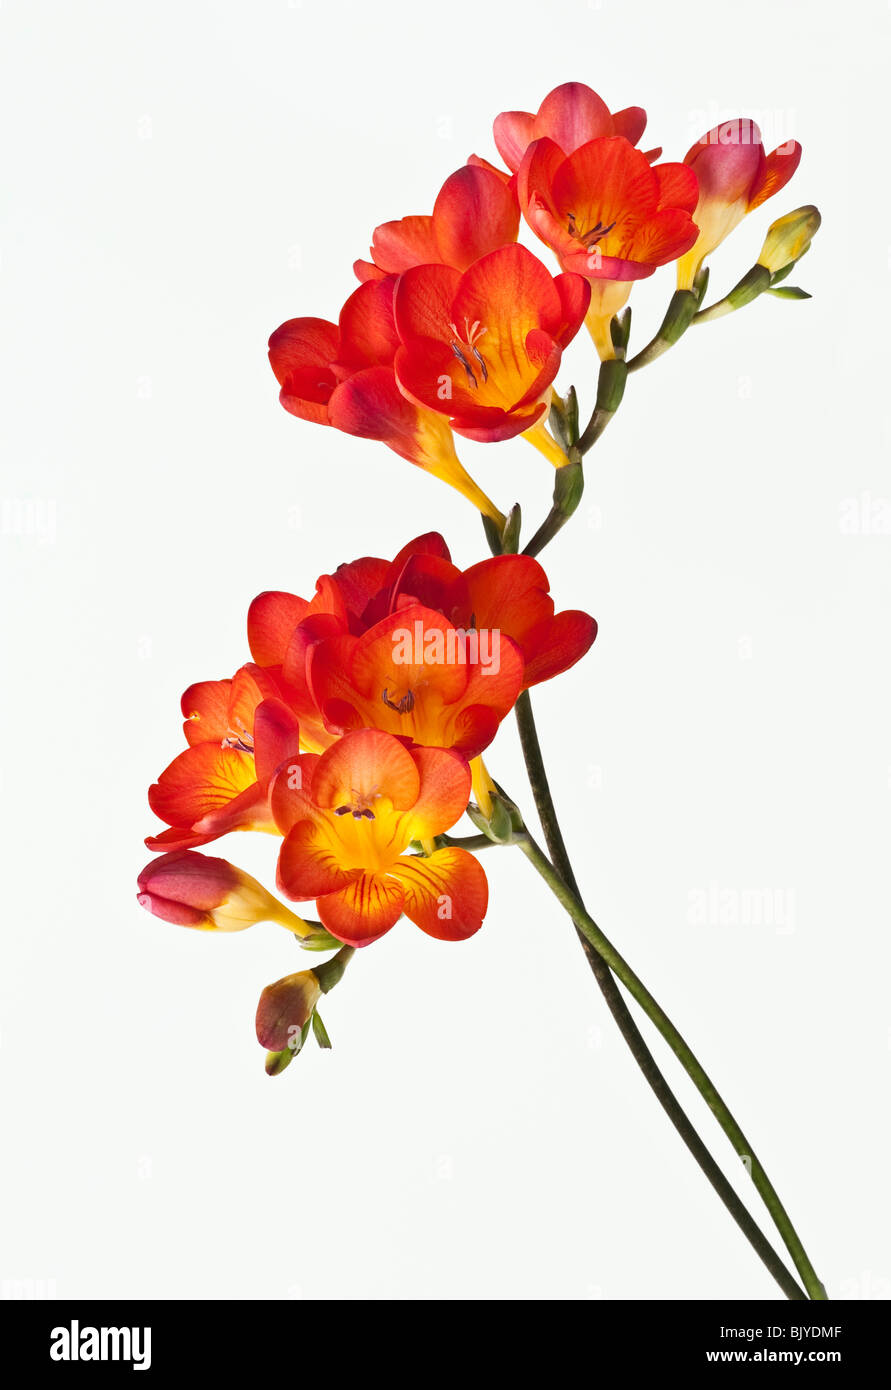 Red Freesia in bloom Stock Photo